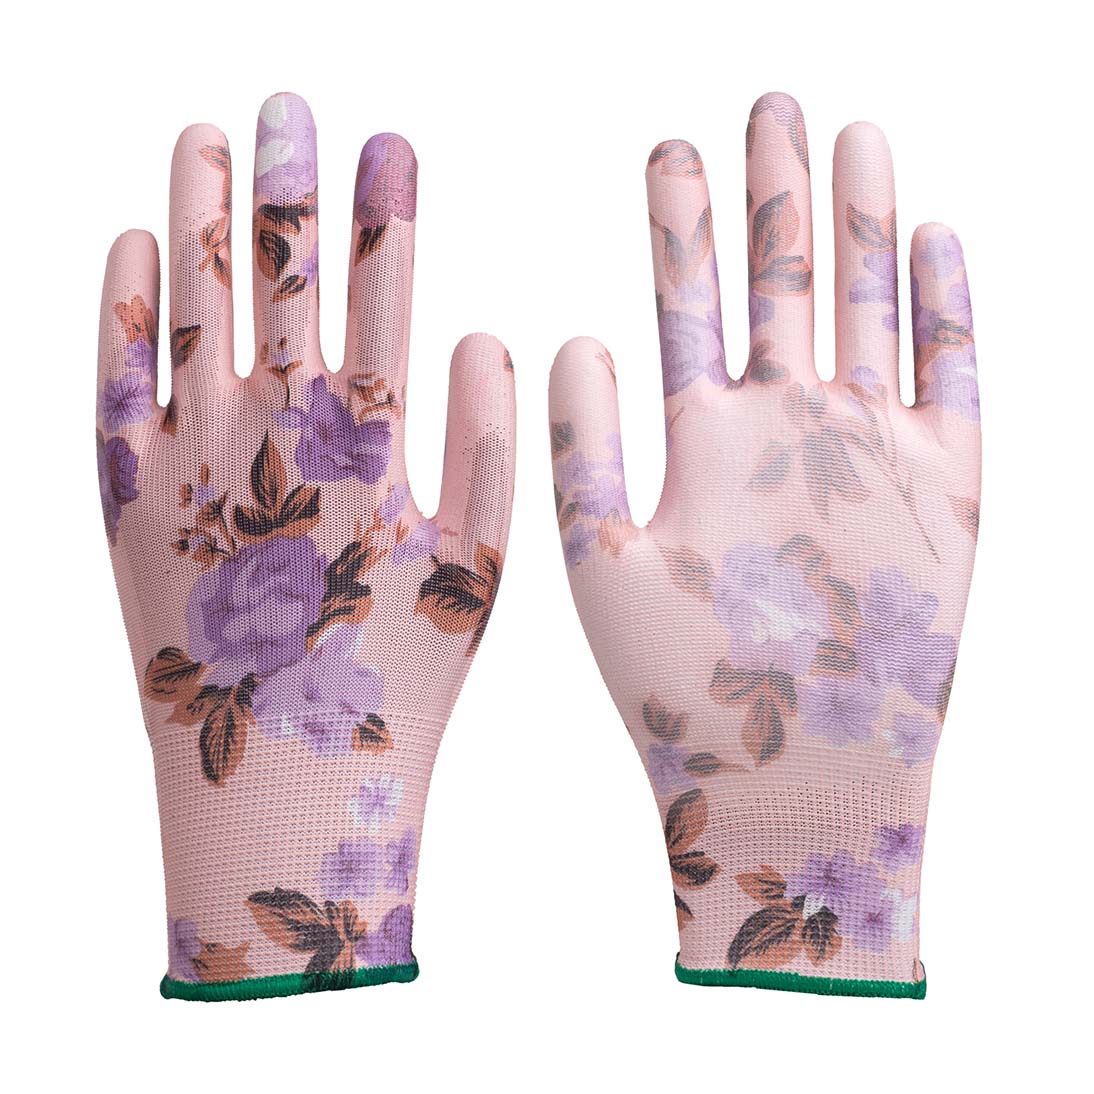 13G printed polyester glove PU palm coated